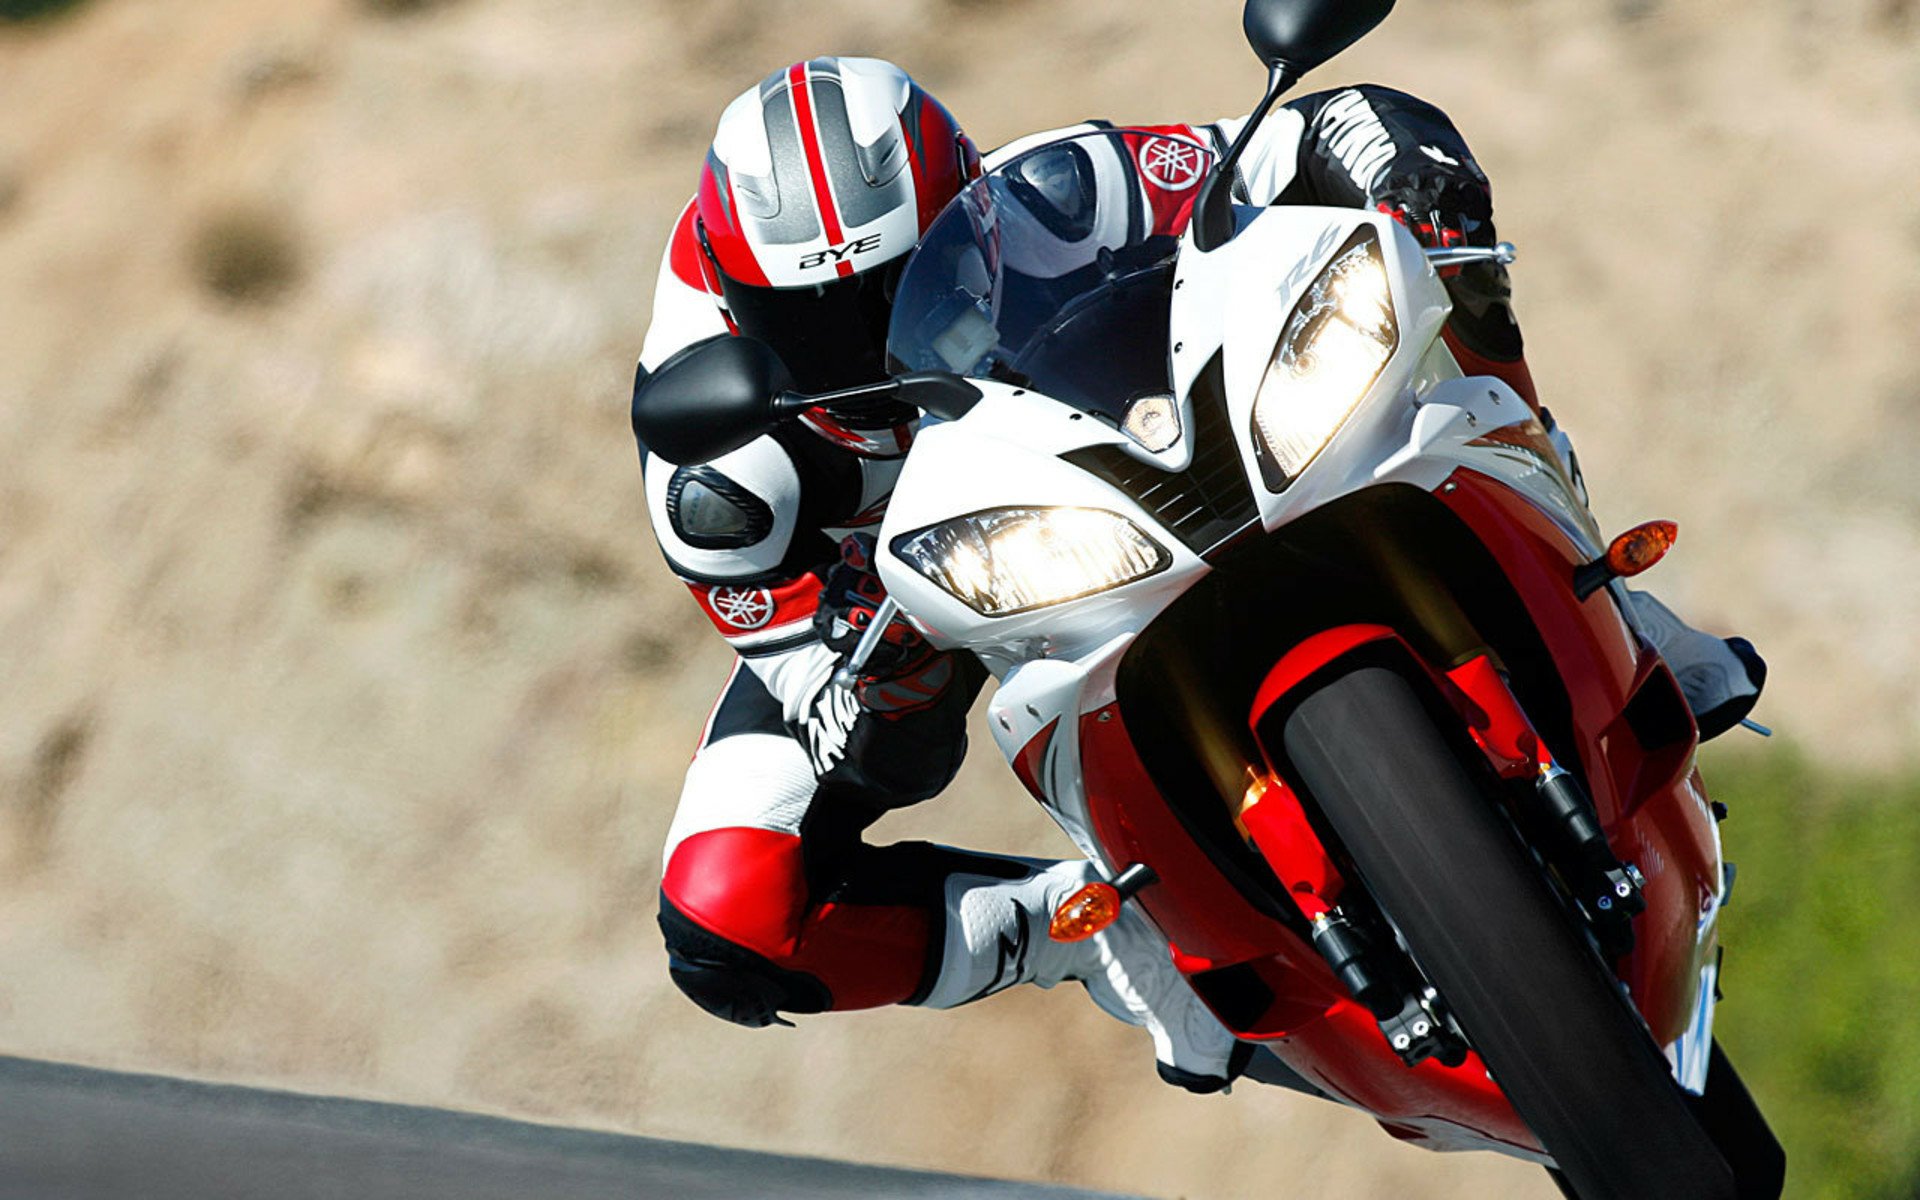 10+ Yamaha R6 HD Wallpapers and Backgrounds